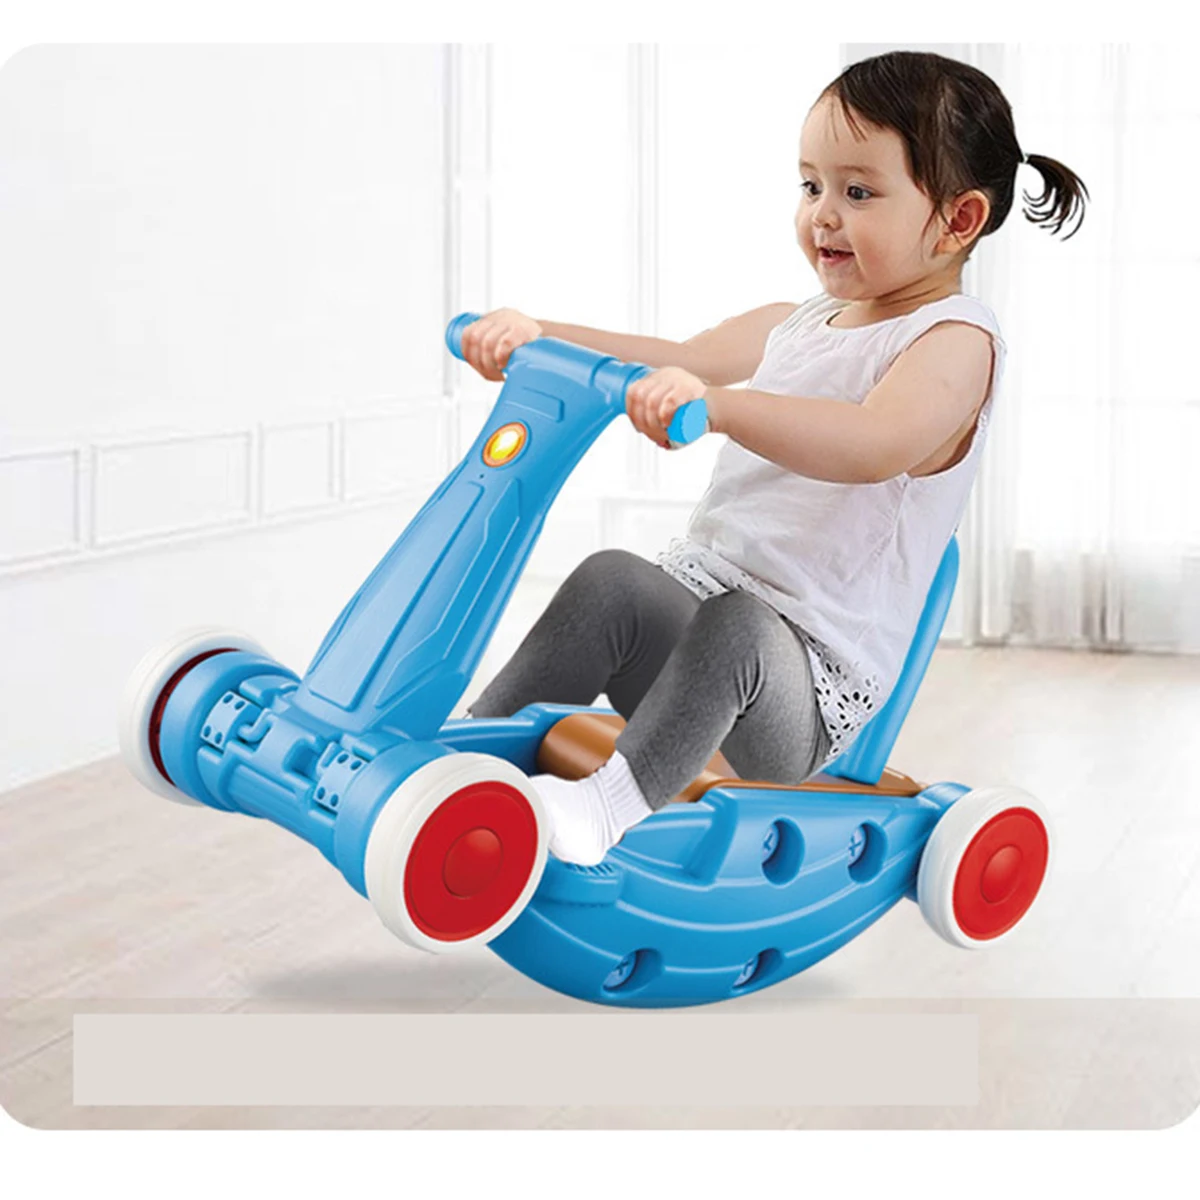 

3 In 1 New Baby Walker Trolley Assemblable Rocking Horse Ride On Toys for Toddler Learning Walking Stroller Scooter Car Gifts